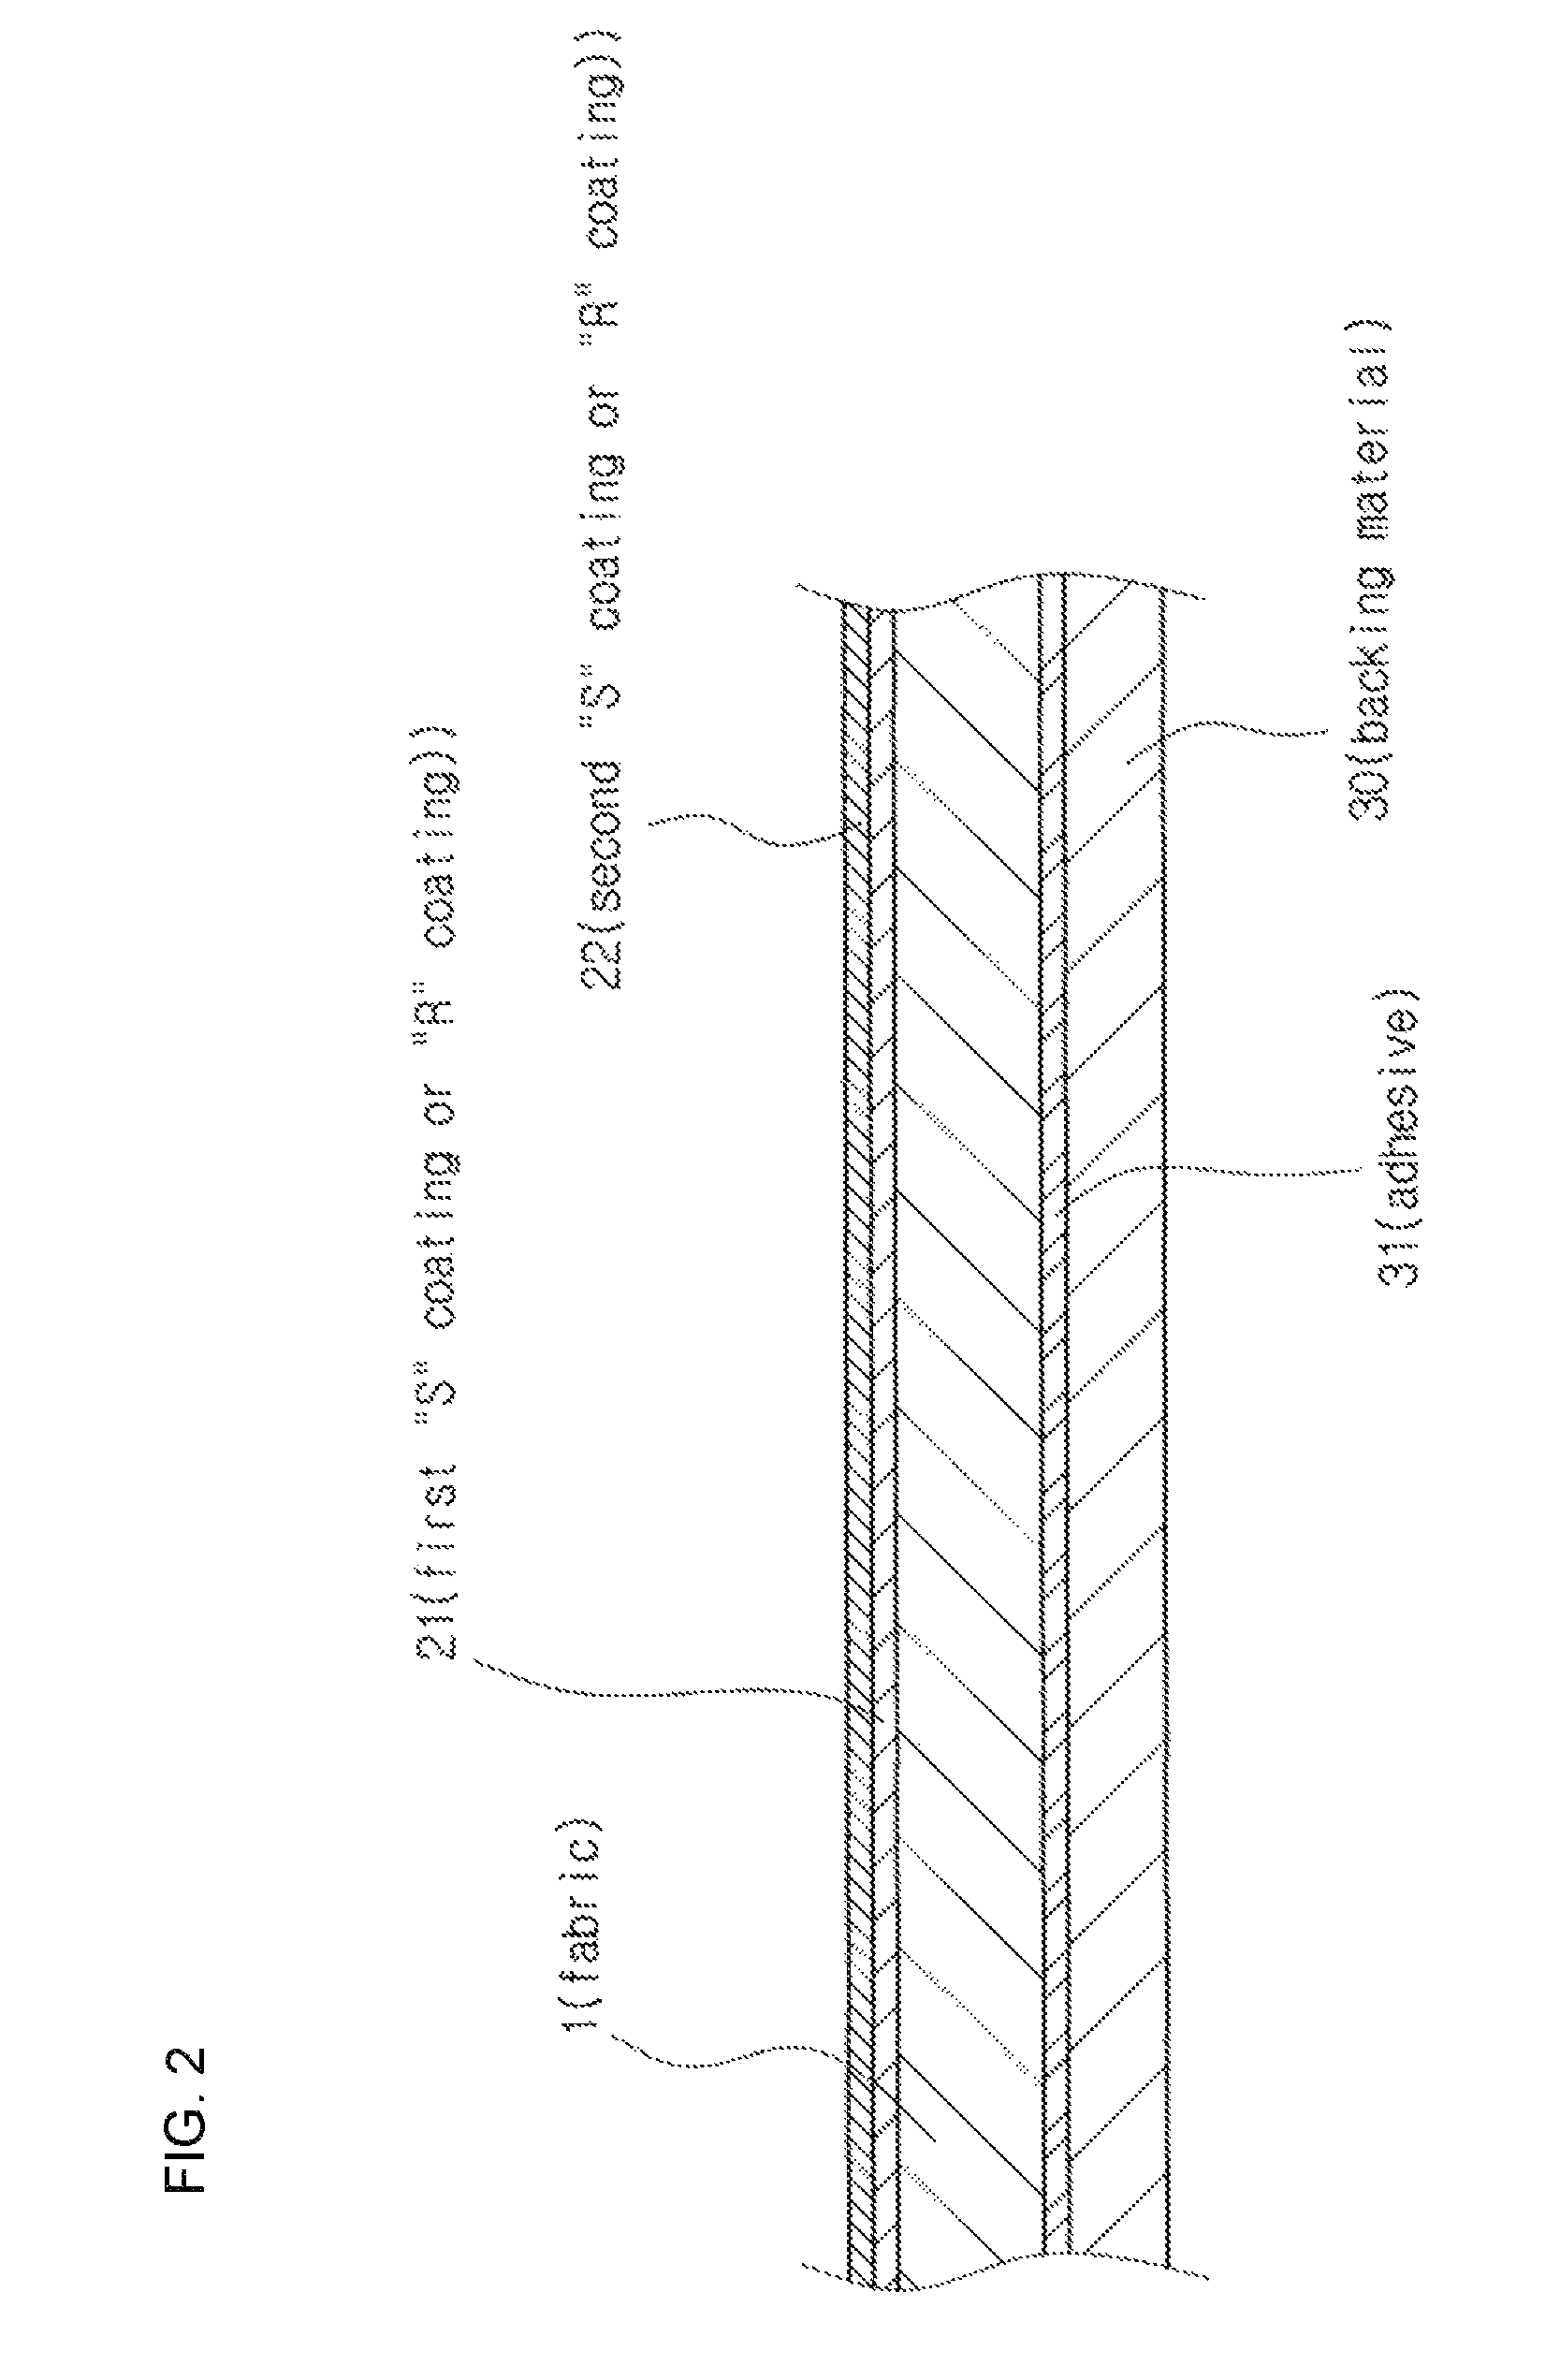 Readherable, repositionable and reusable adhesive fabric paper for printing and manufacturing method thereof